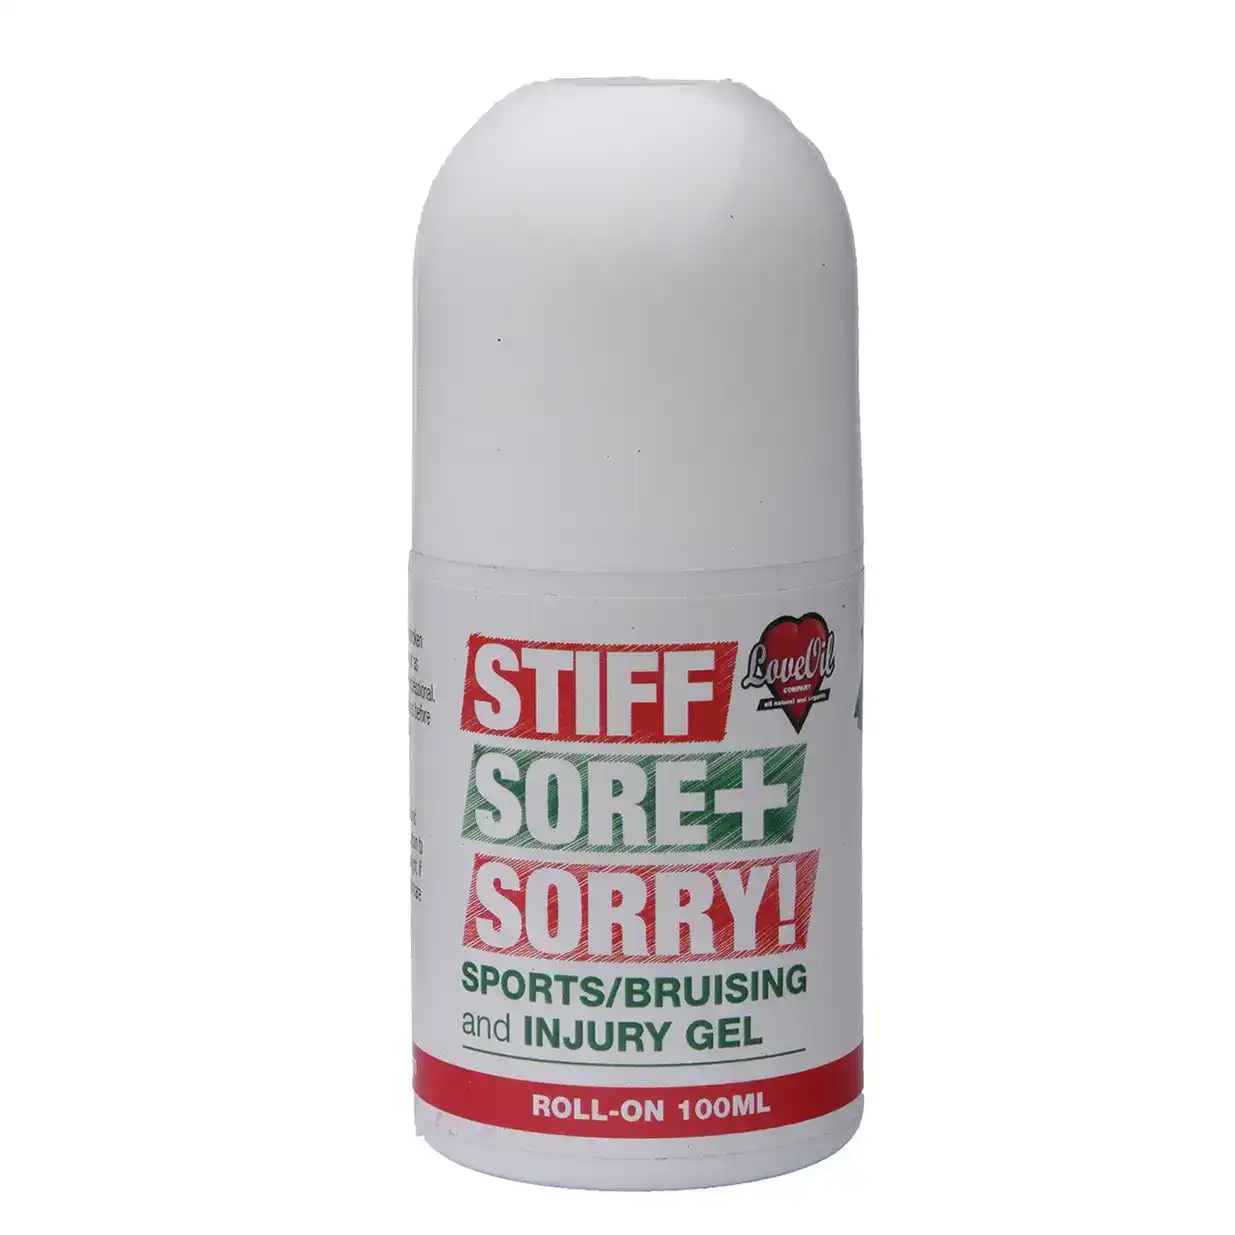 Stiff Sore + Sorry Sports/Bruising and Injury Roll-On 100ml